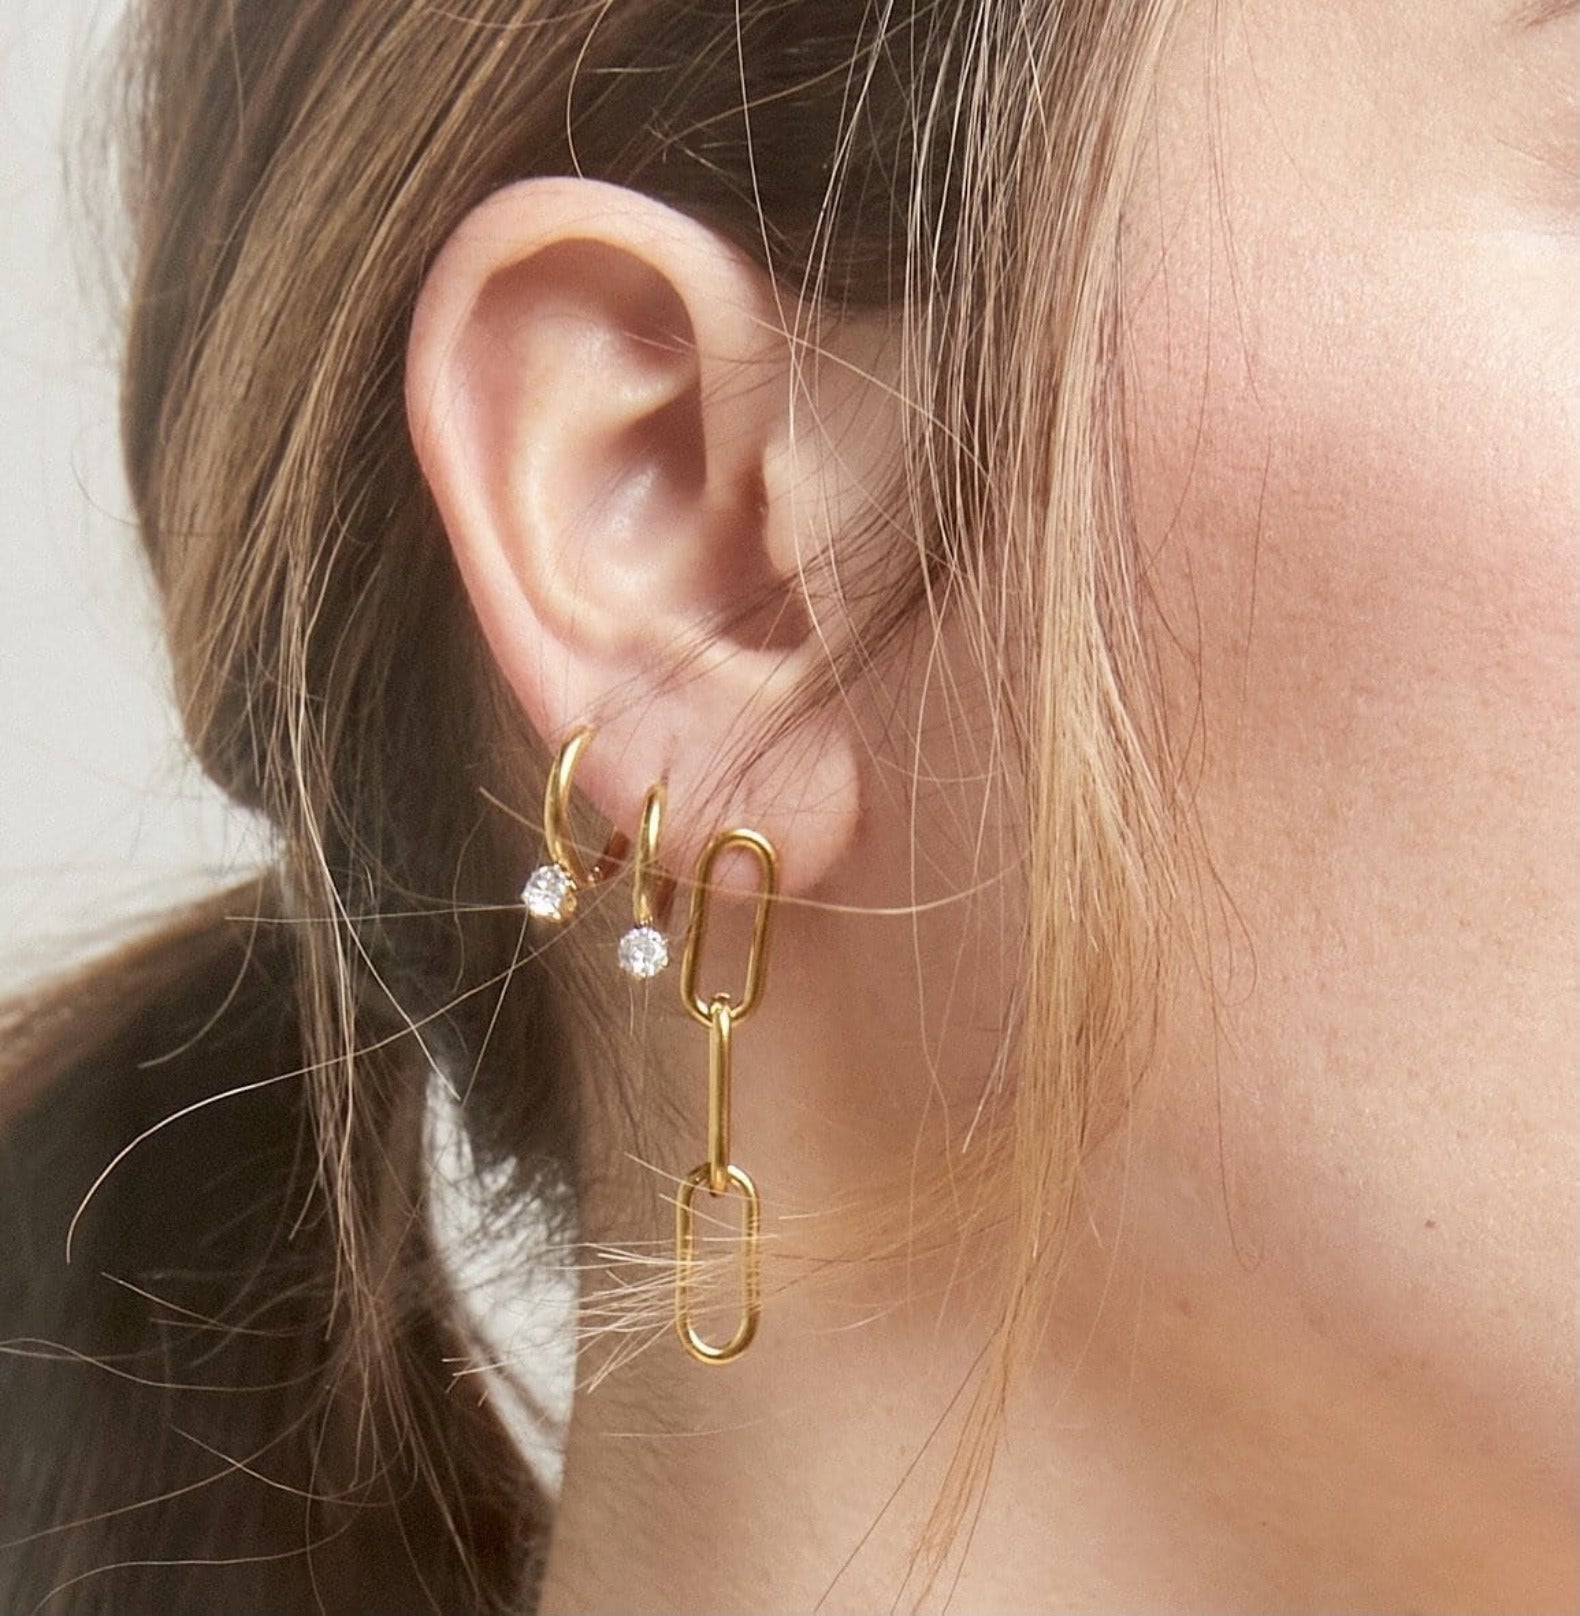 MINERO MINI HOOP EARRINGS earing Yubama Jewelry Online Store - The Elegant Designs of Gold and Silver ! 